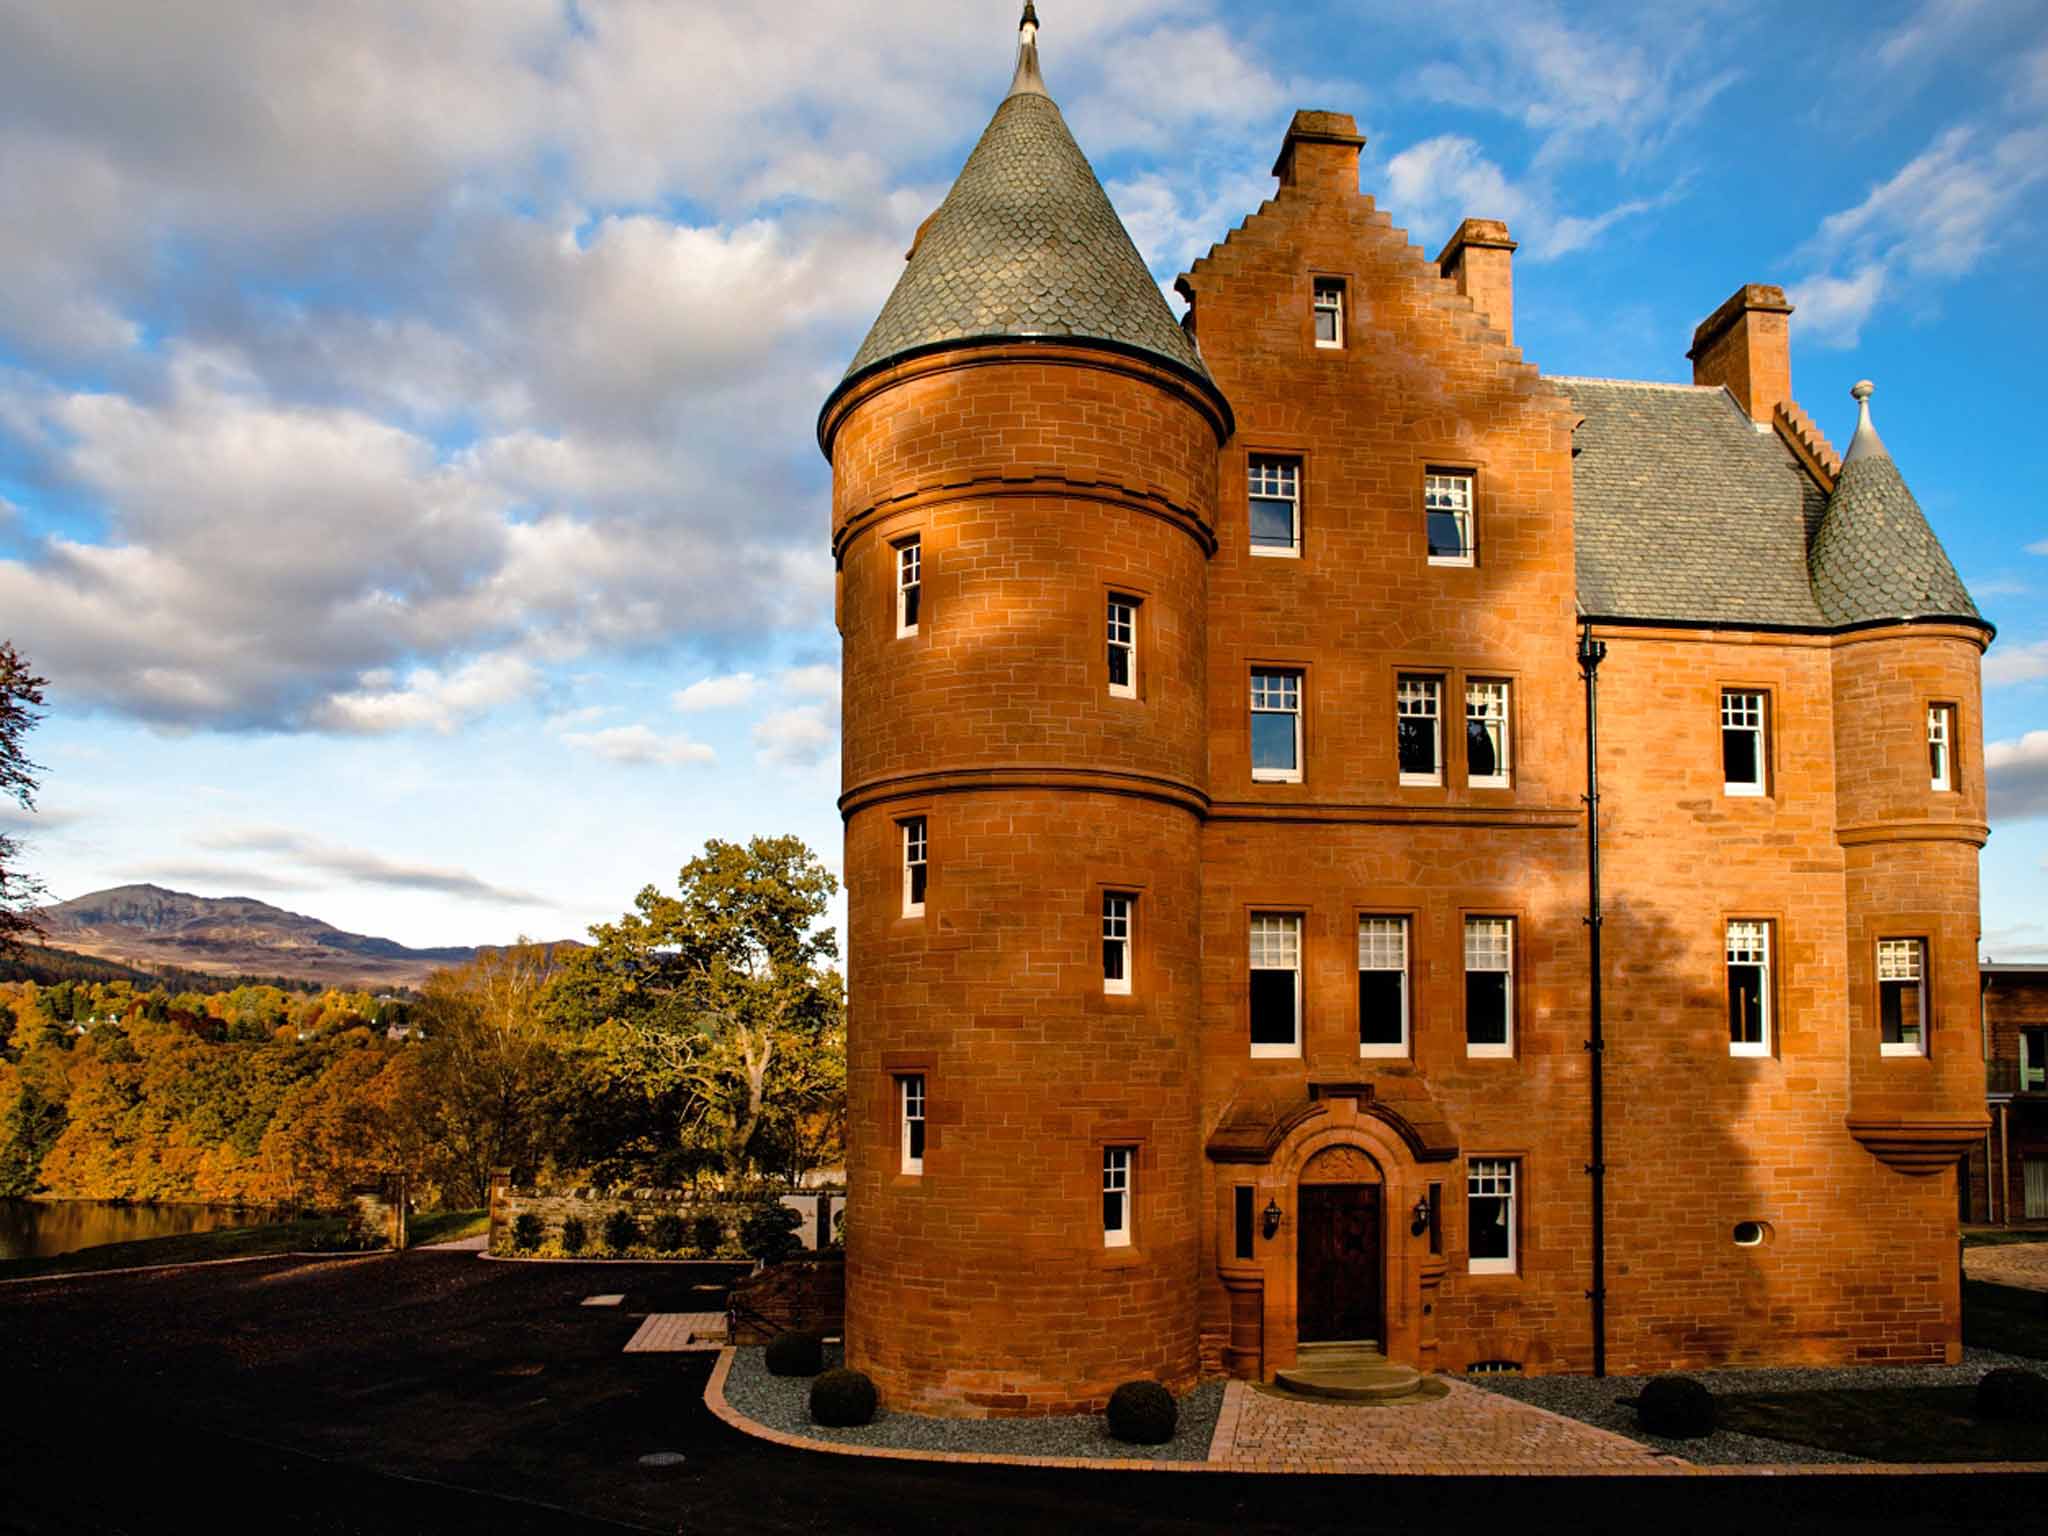 Stay in a Scottish castle: Turrets, bed steps, and Mary Queen of Scots